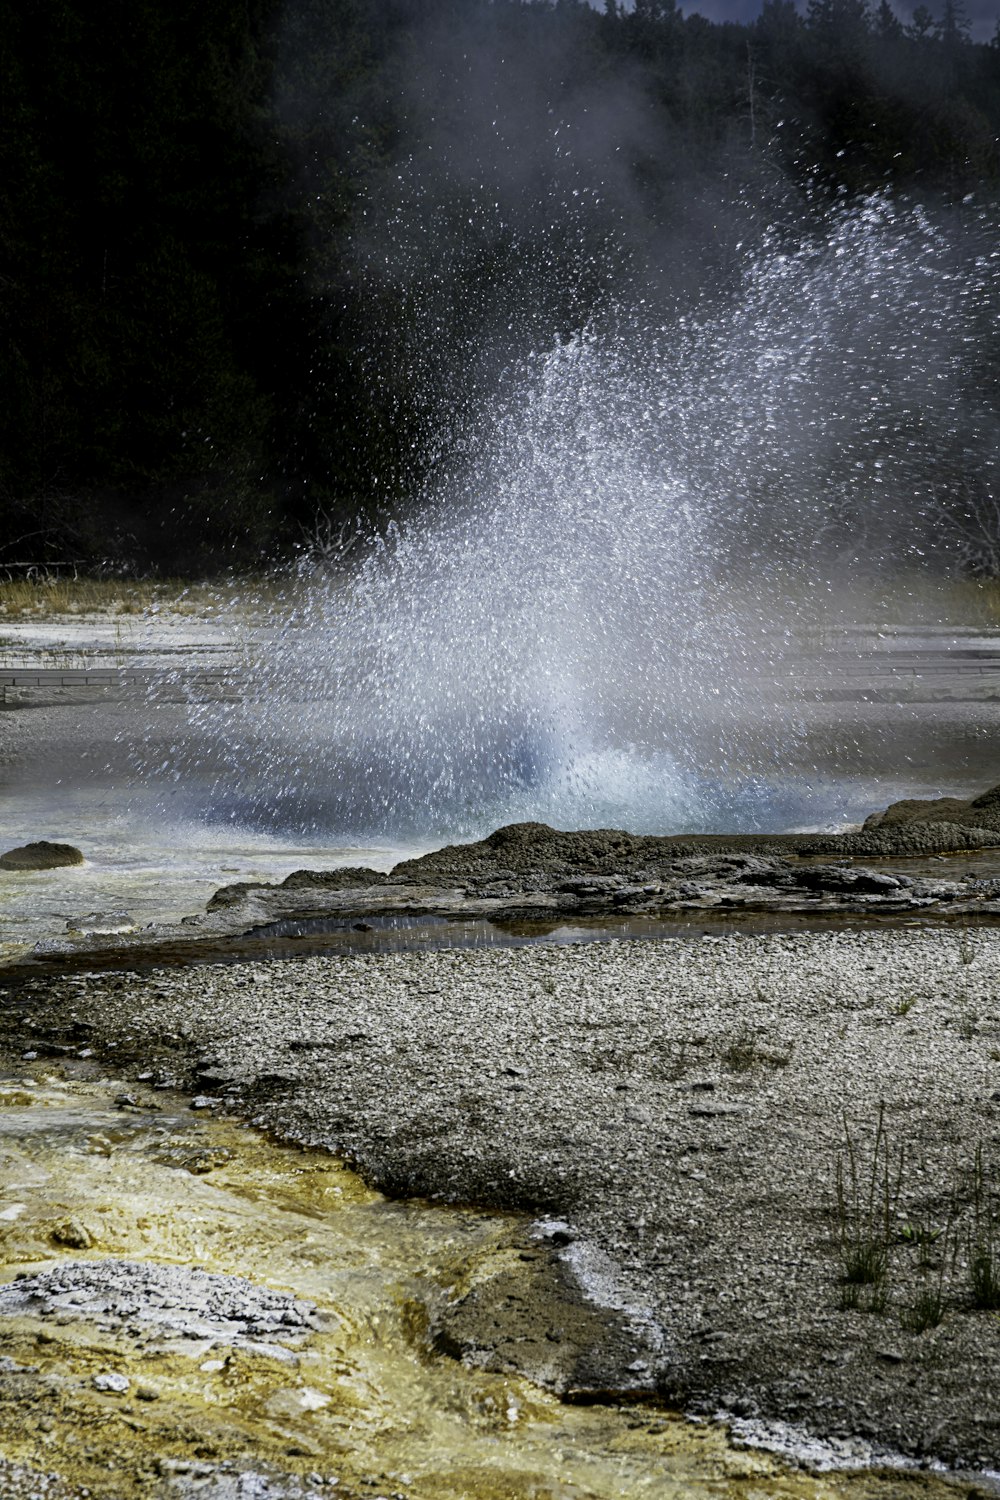 a geyser spewing water into a pond